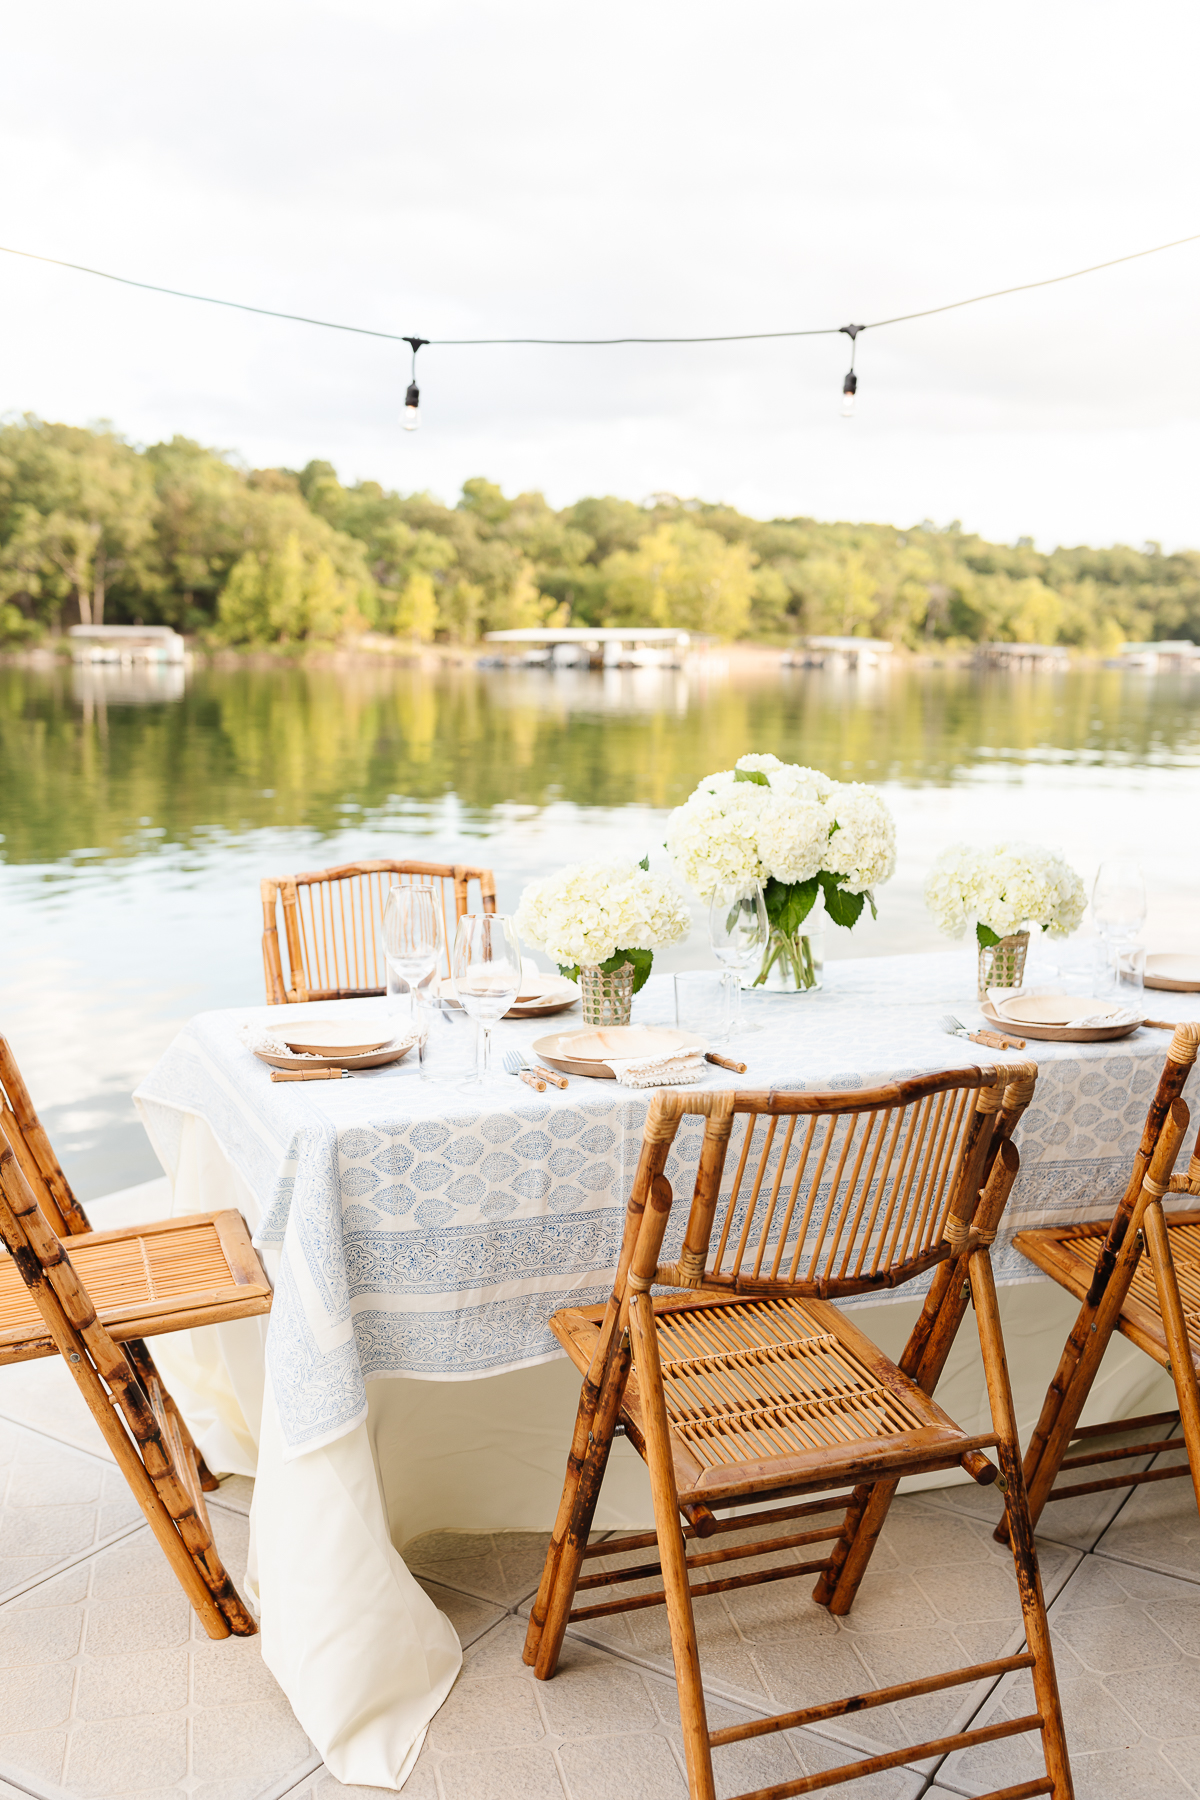 A table set up with white flowers, illuminated by the outdoor lighting with a lake in the background.